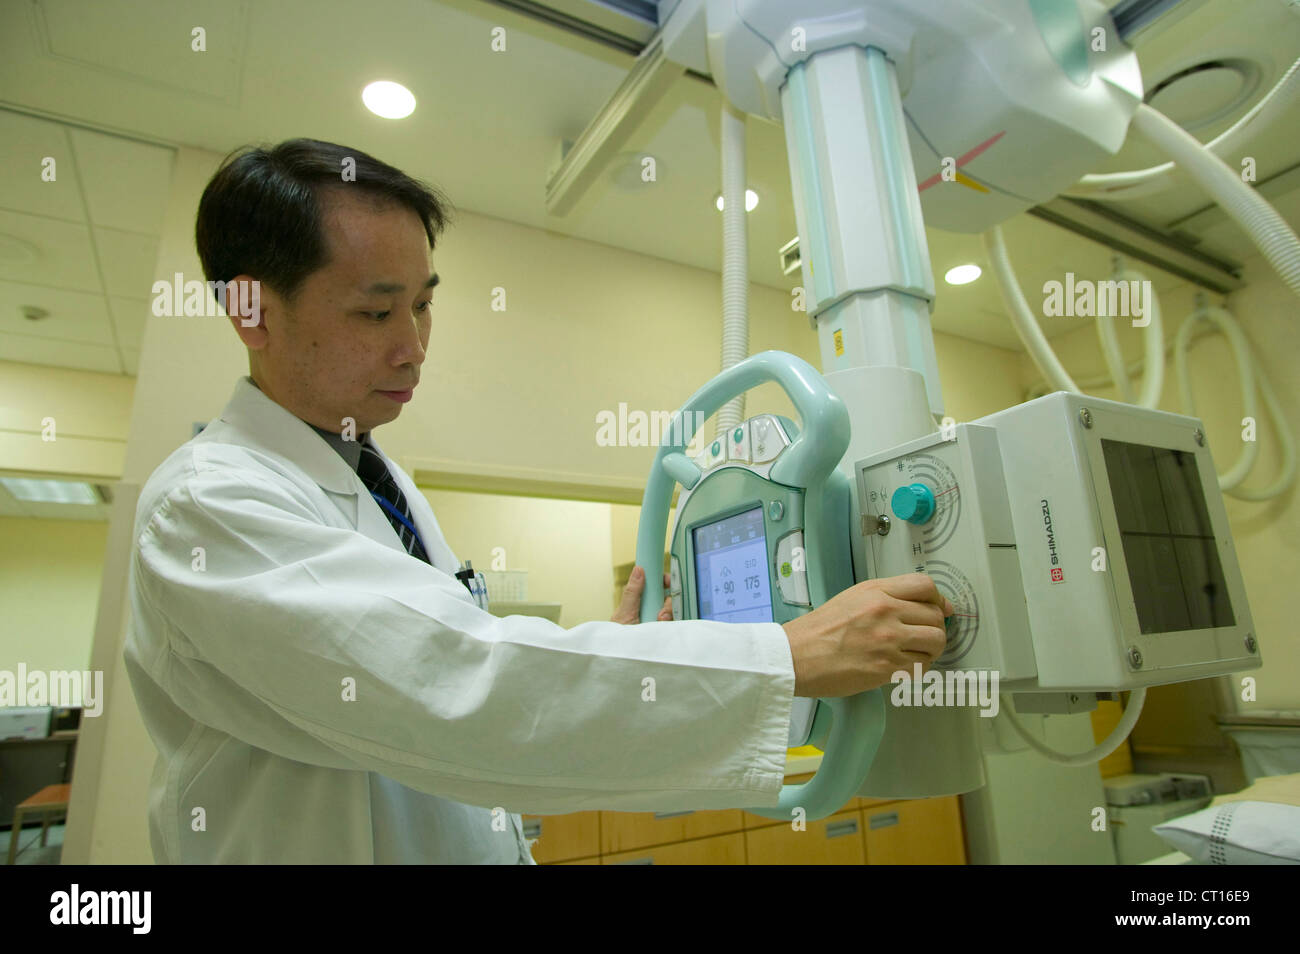 A radiologist adjusts an x-ray machine prior to use. Stock Photo